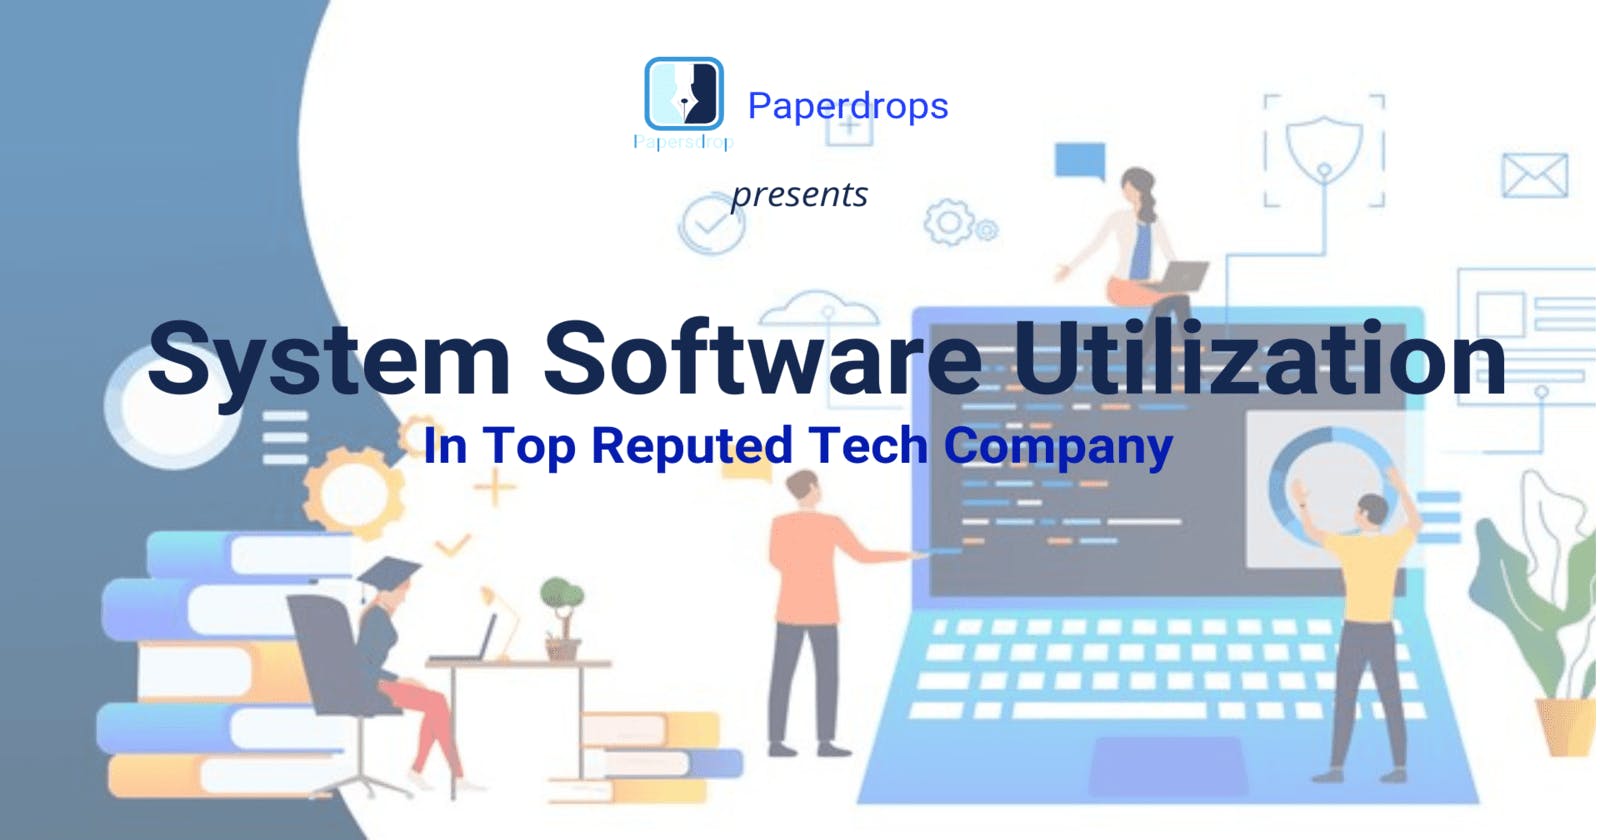 System Software Utilization In Top Reputed Tech Company